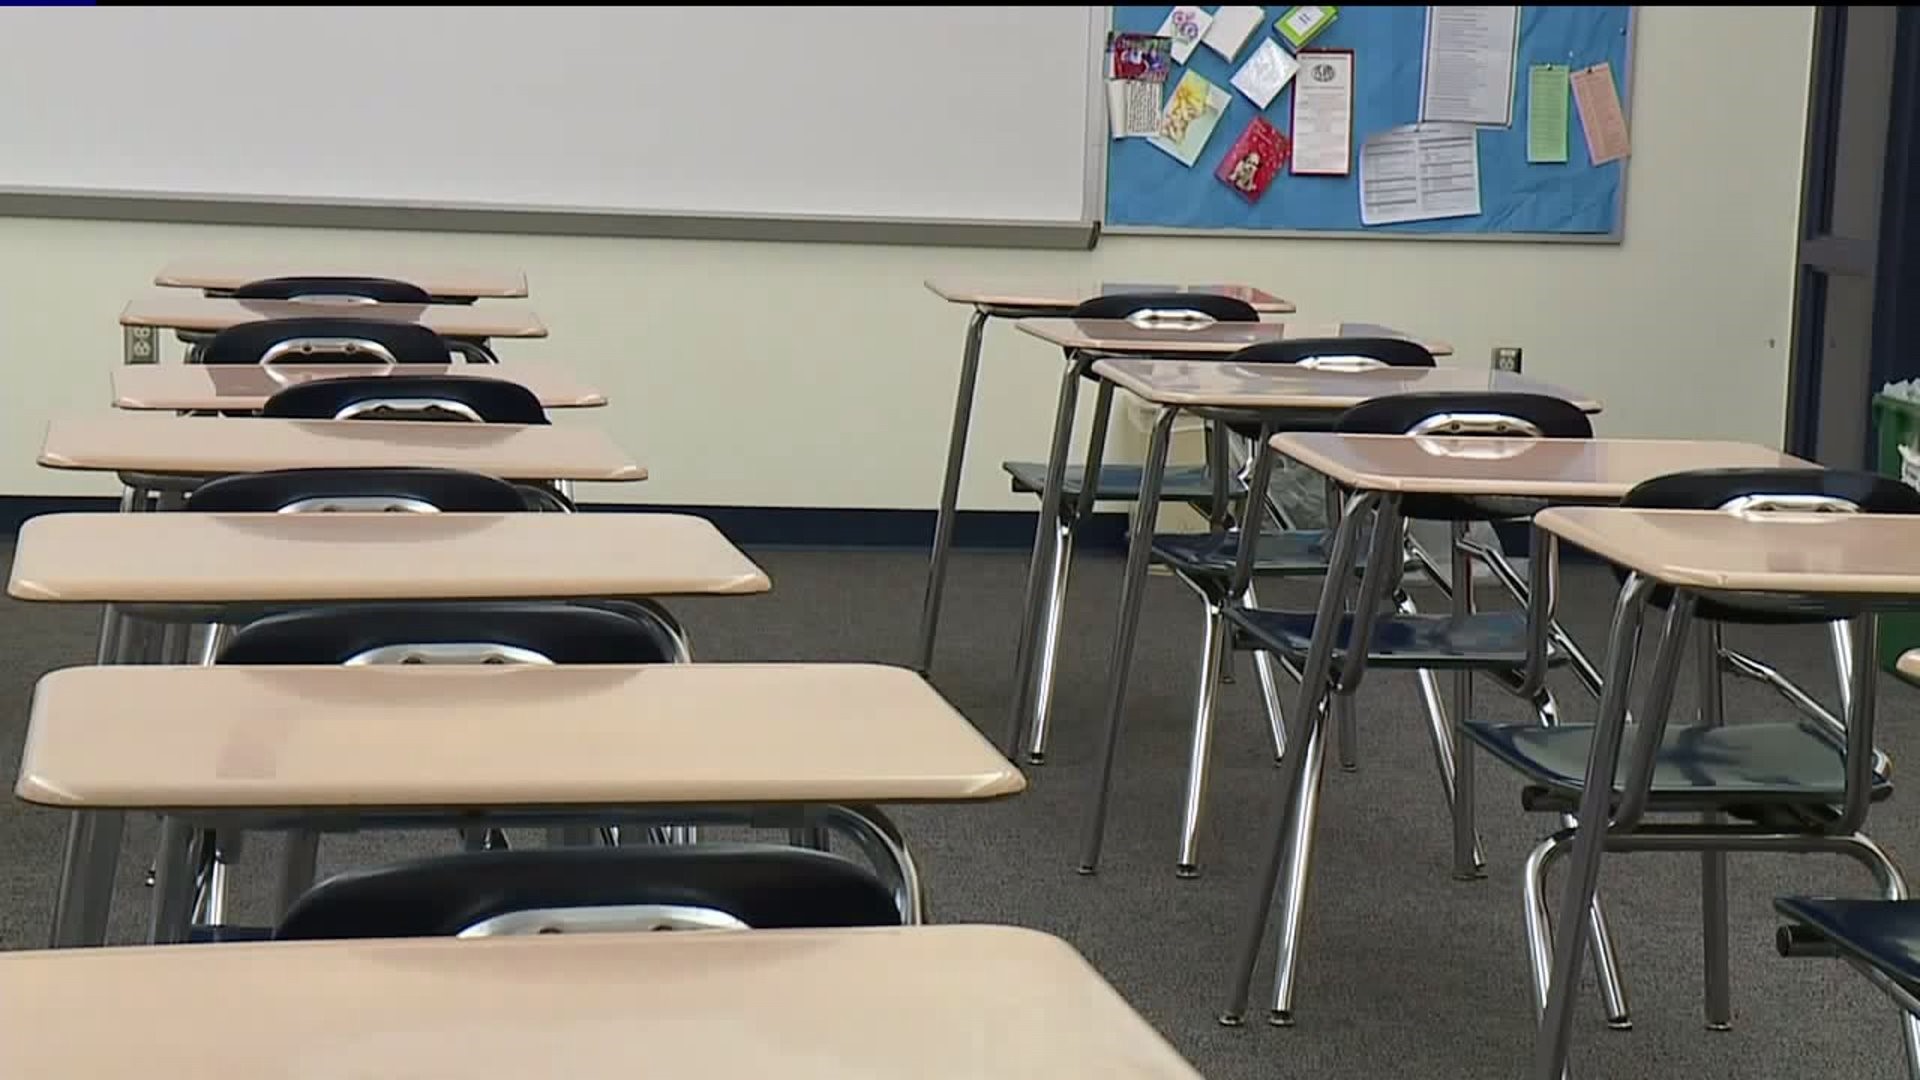 School Work at Home: Bill Approved by State Lawmakers